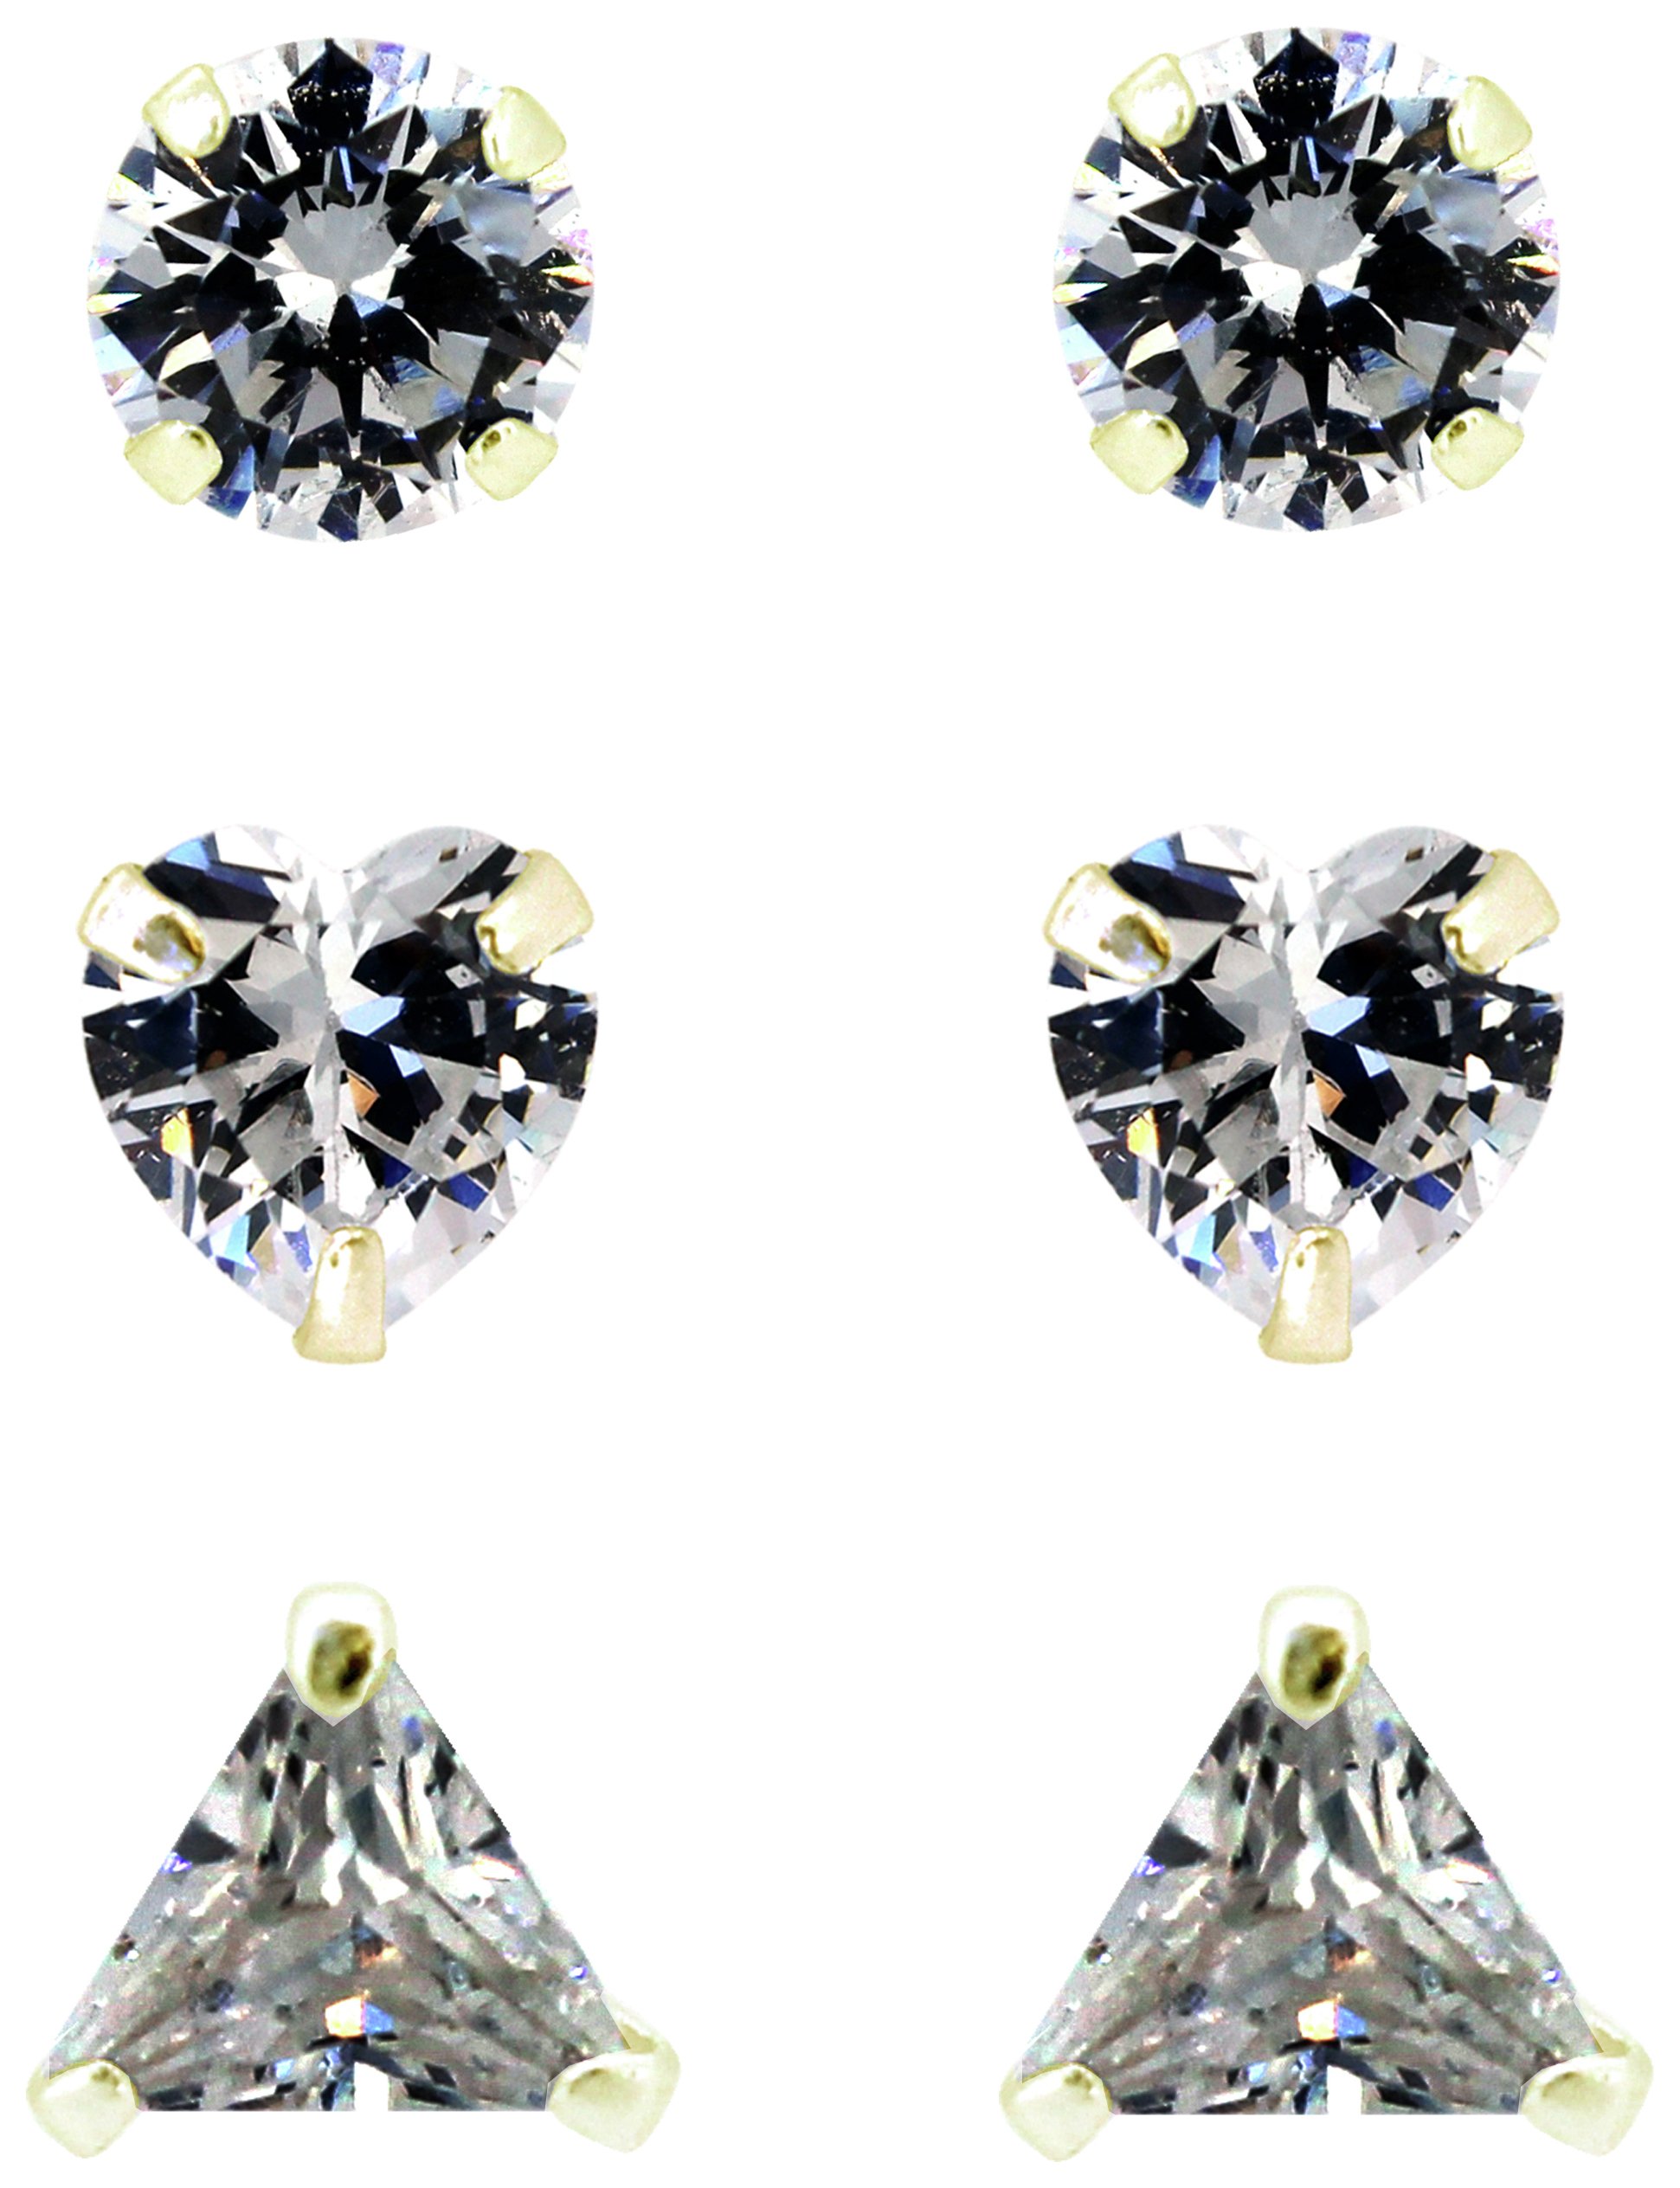 Link Up Gold Plated Silver Crystal Stud Earrings - Set of 3.